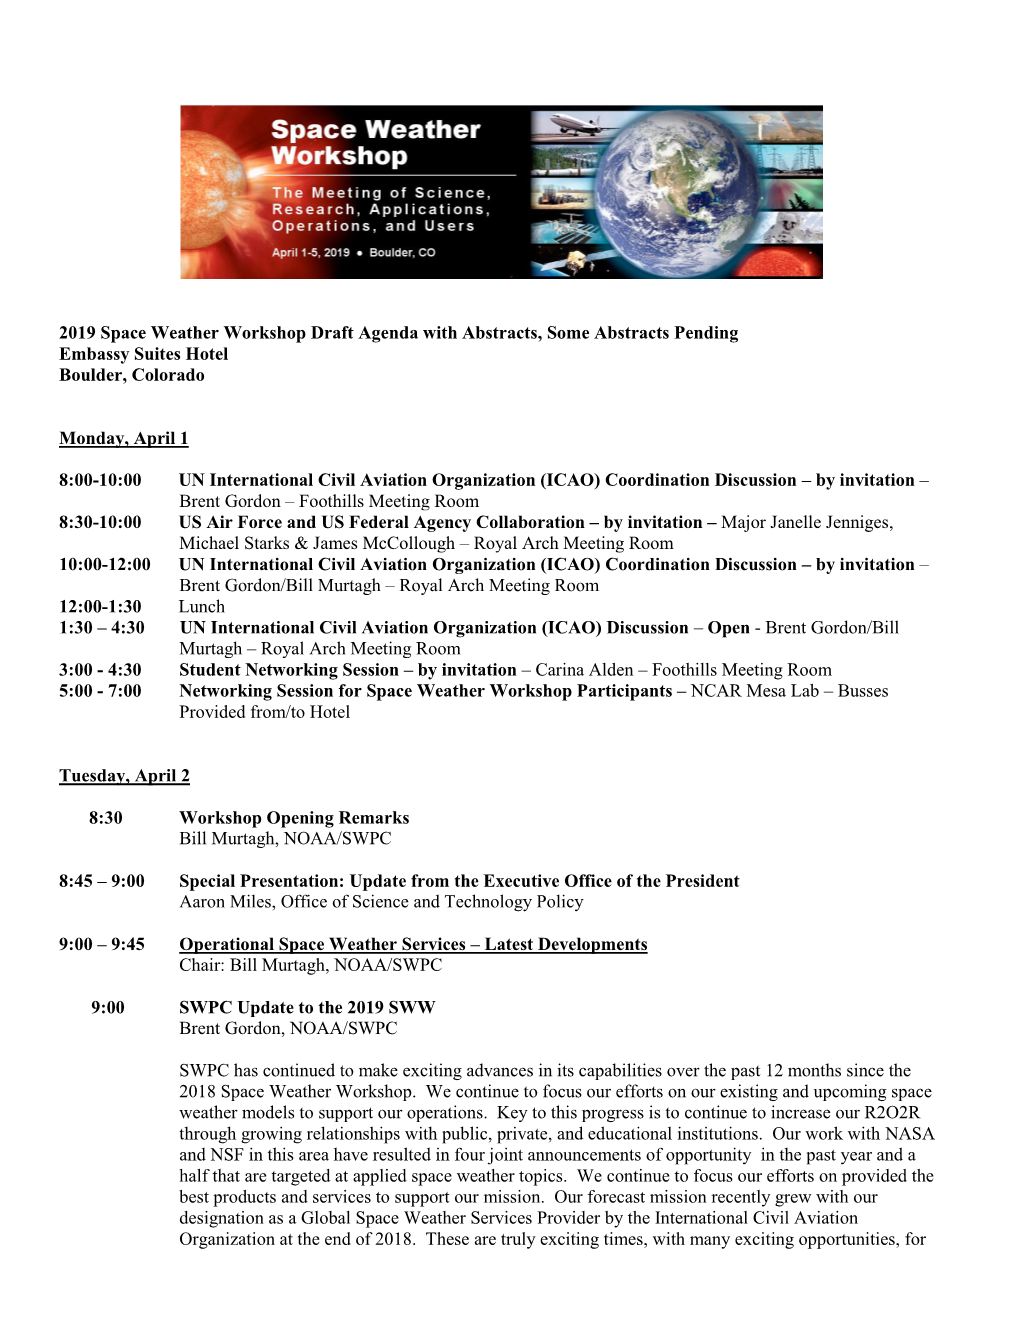 2019 Space Weather Workshop Draft Agenda with Abstracts, Some Abstracts Pending Embassy Suites Hotel Boulder, Colorado